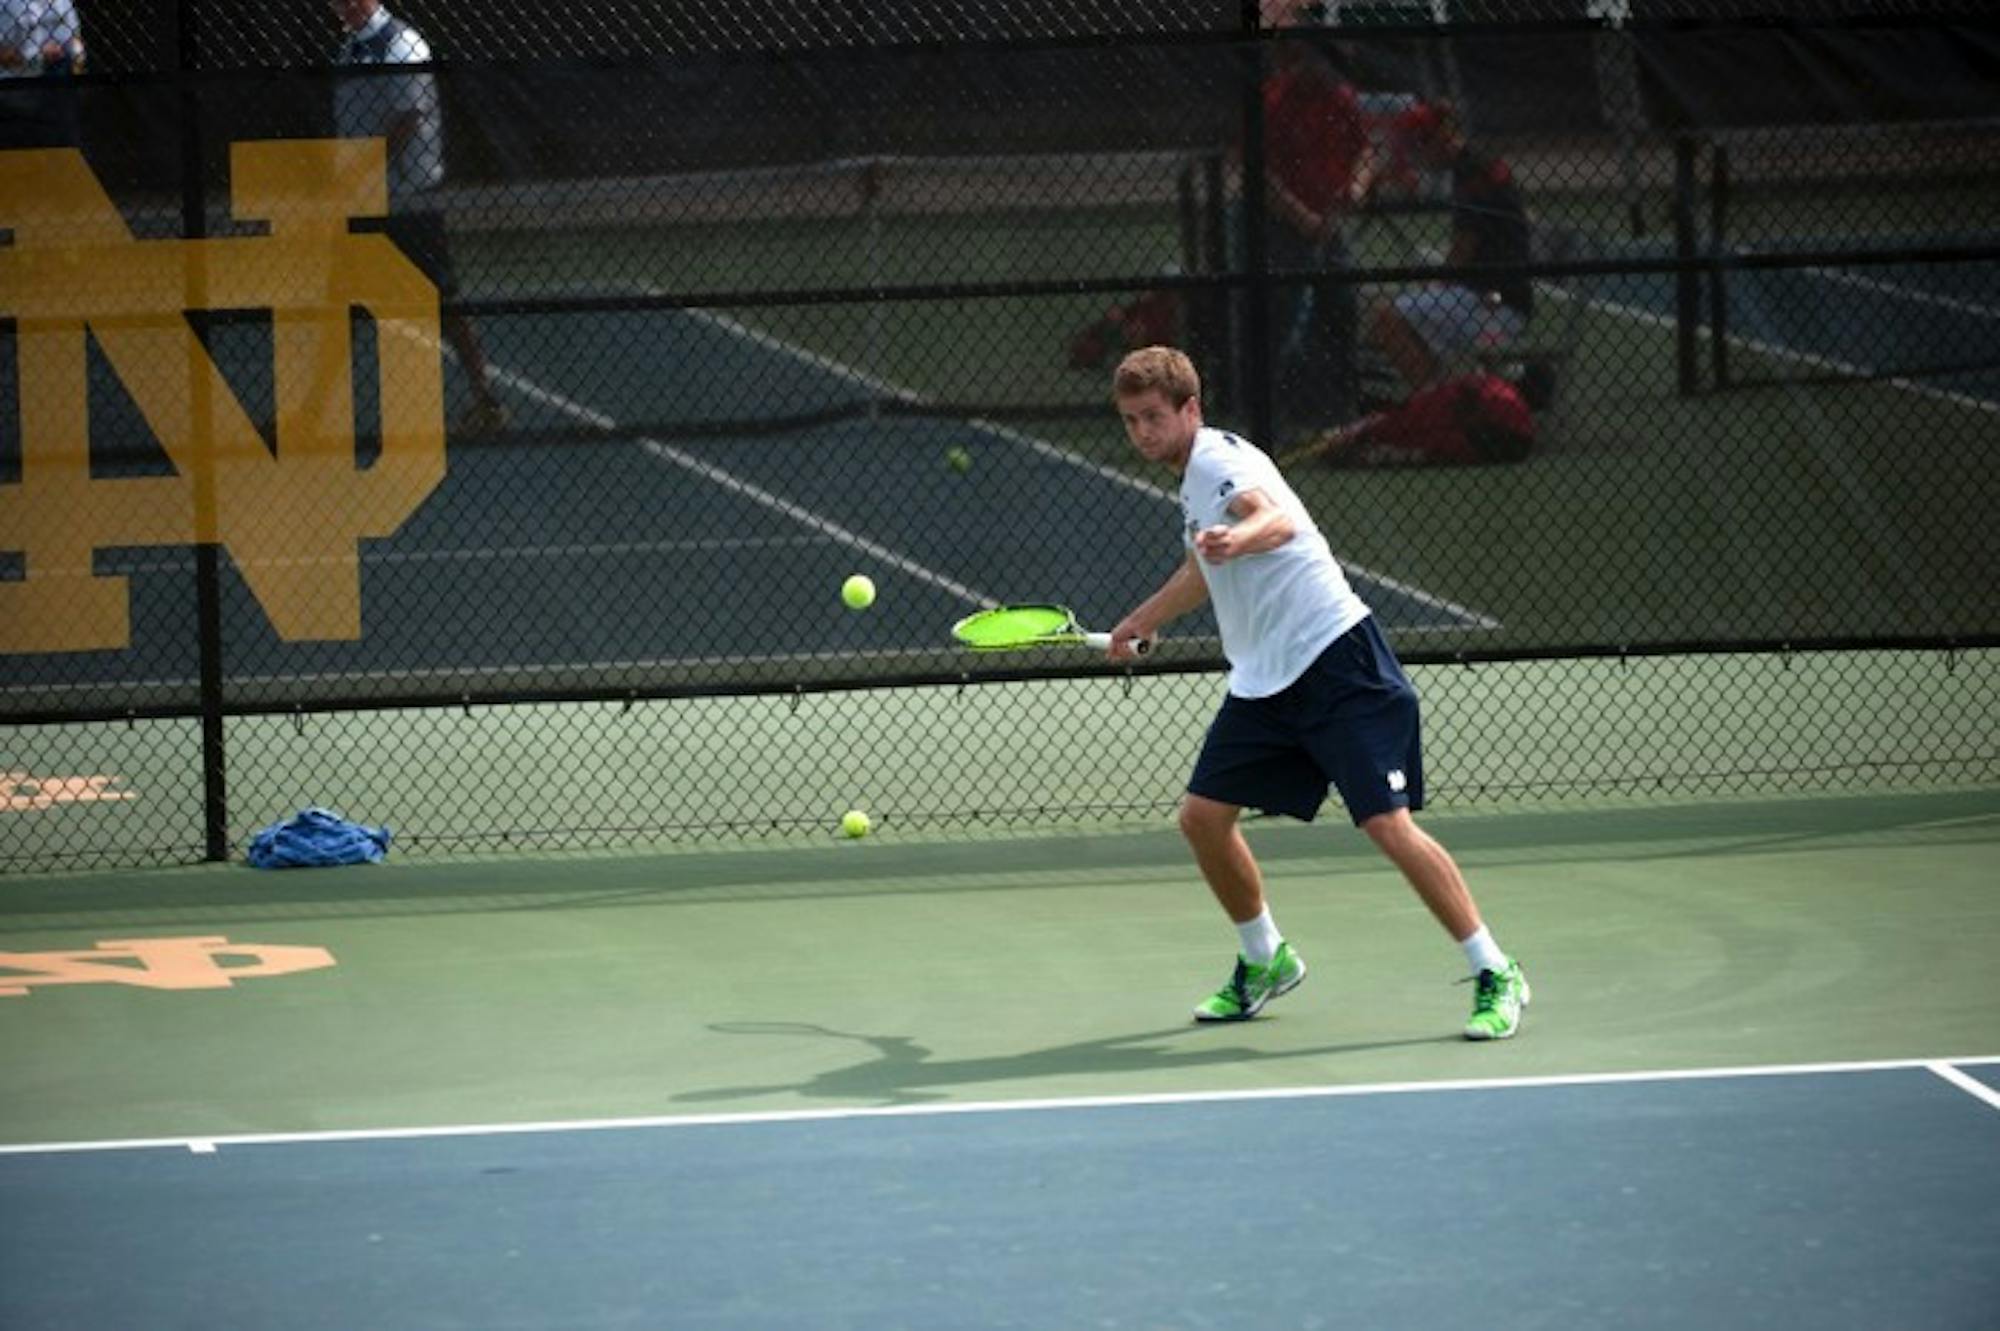 Irish senior Quentin Monaghan attempts a forehand during Notre Dame’s 4-3 win over North Carolina State on April 18 at Courtney Tennis Center. Monaghan won his only singles match Saturday.